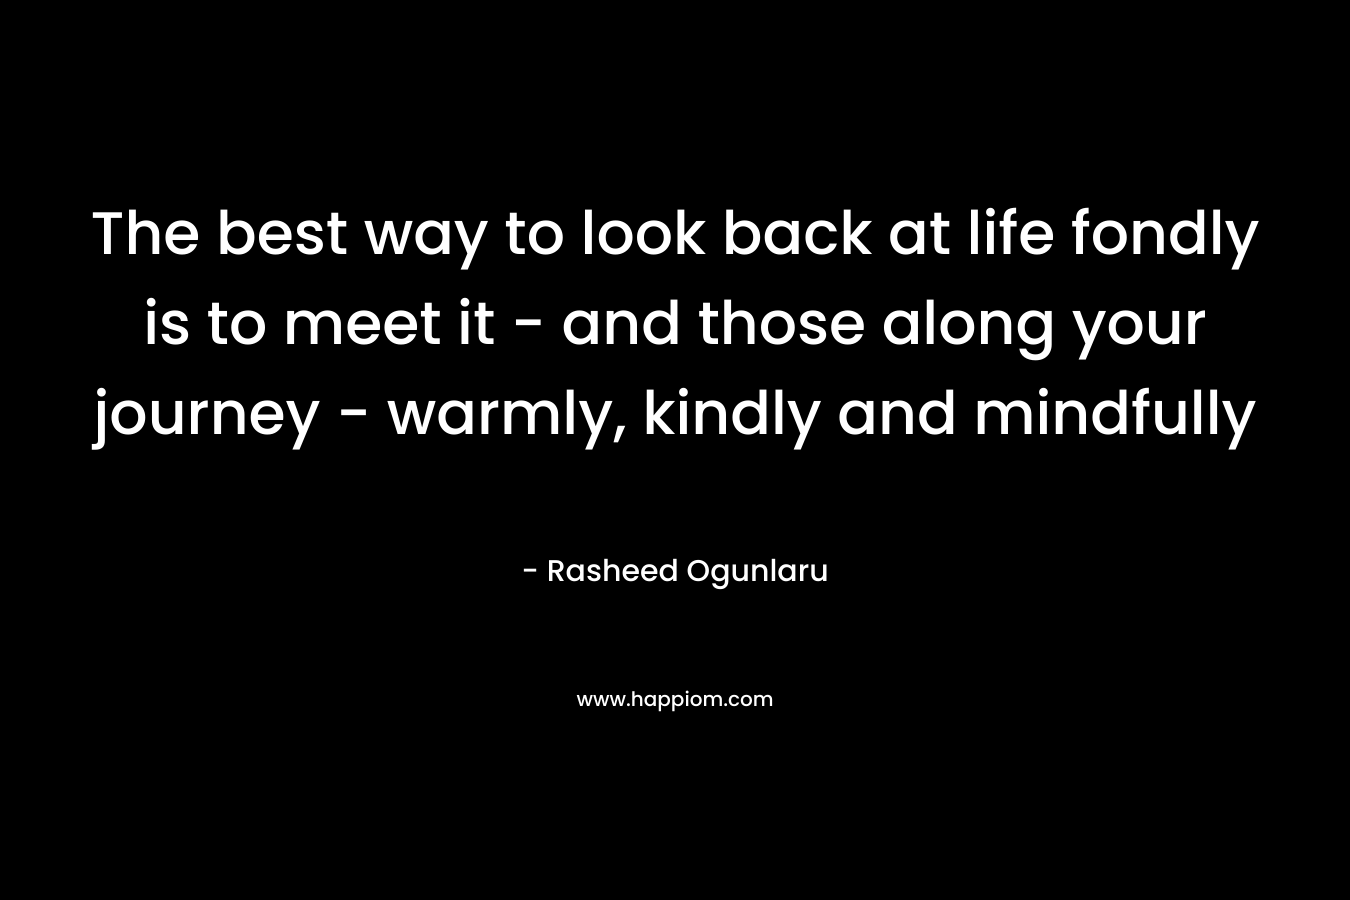 The best way to look back at life fondly is to meet it - and those along your journey - warmly, kindly and mindfully